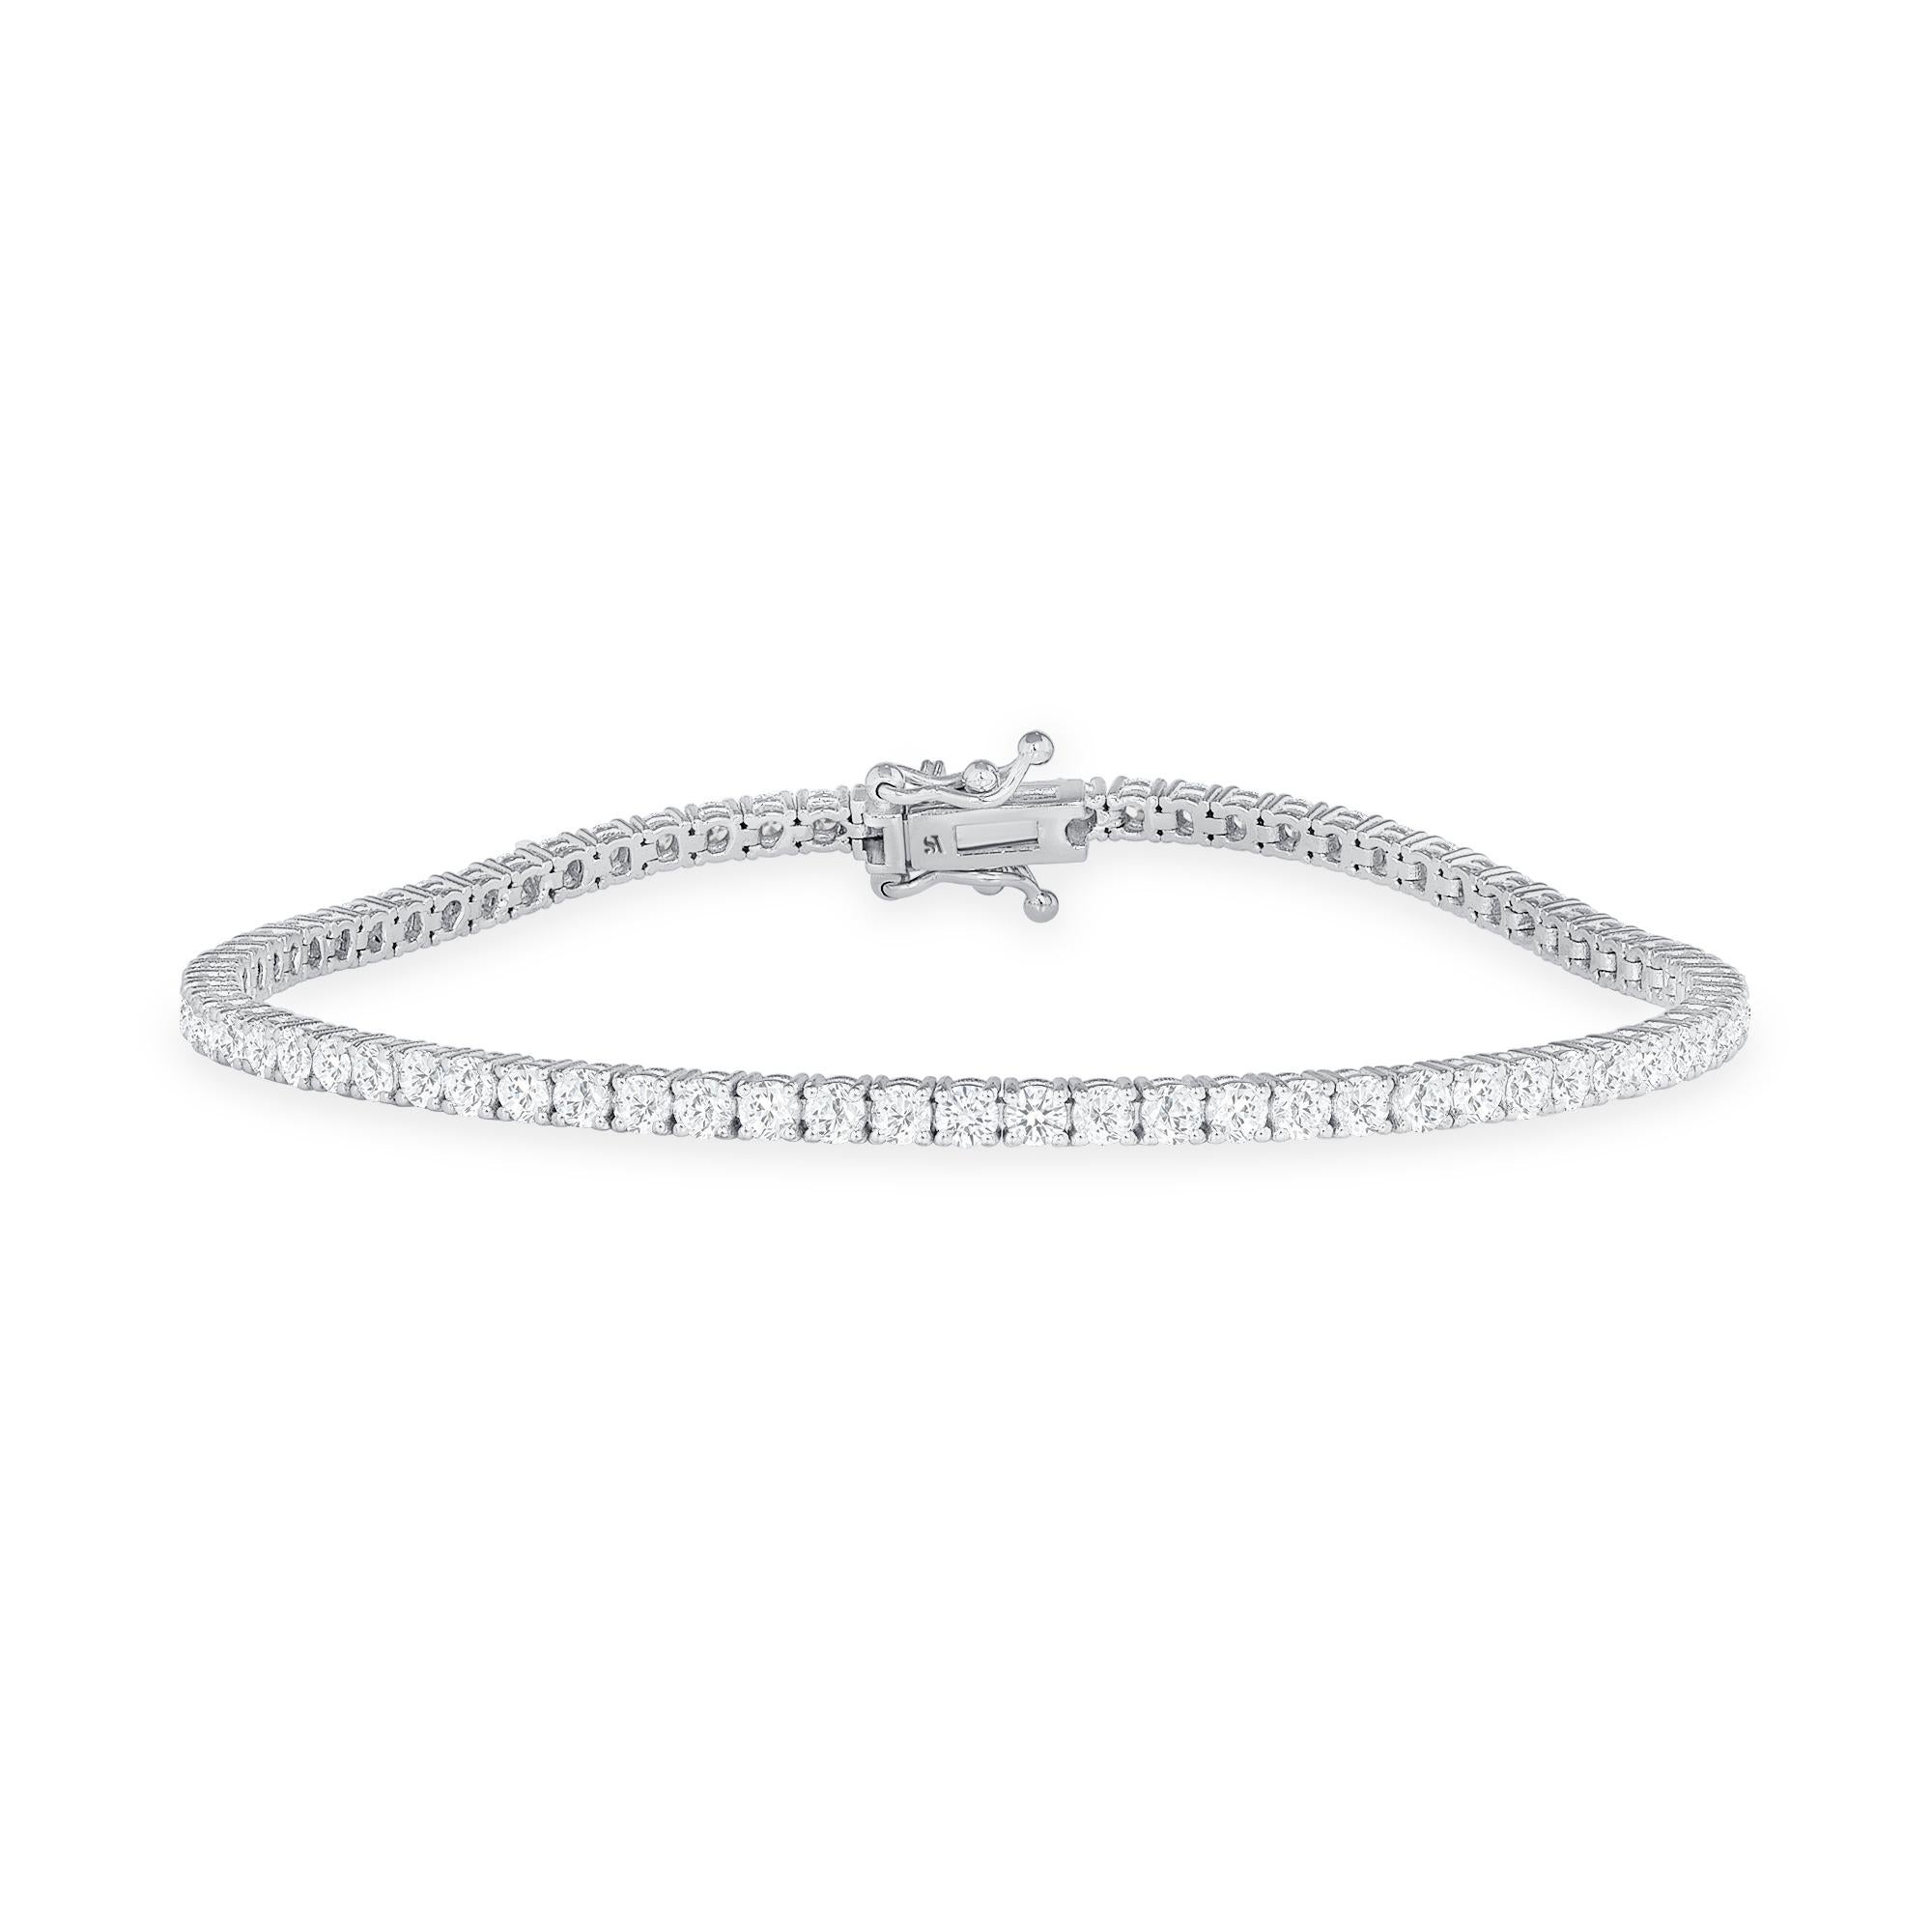 14k Gold 3.60 ct Round Diamond Tennis Bracelet 

Wrap your wrist in this stunning tennis bracelets incomparable brilliance from round diamonds. Set in 14K solid gold, this beautiful natural diamond bracelet features a secure double clasp so you can